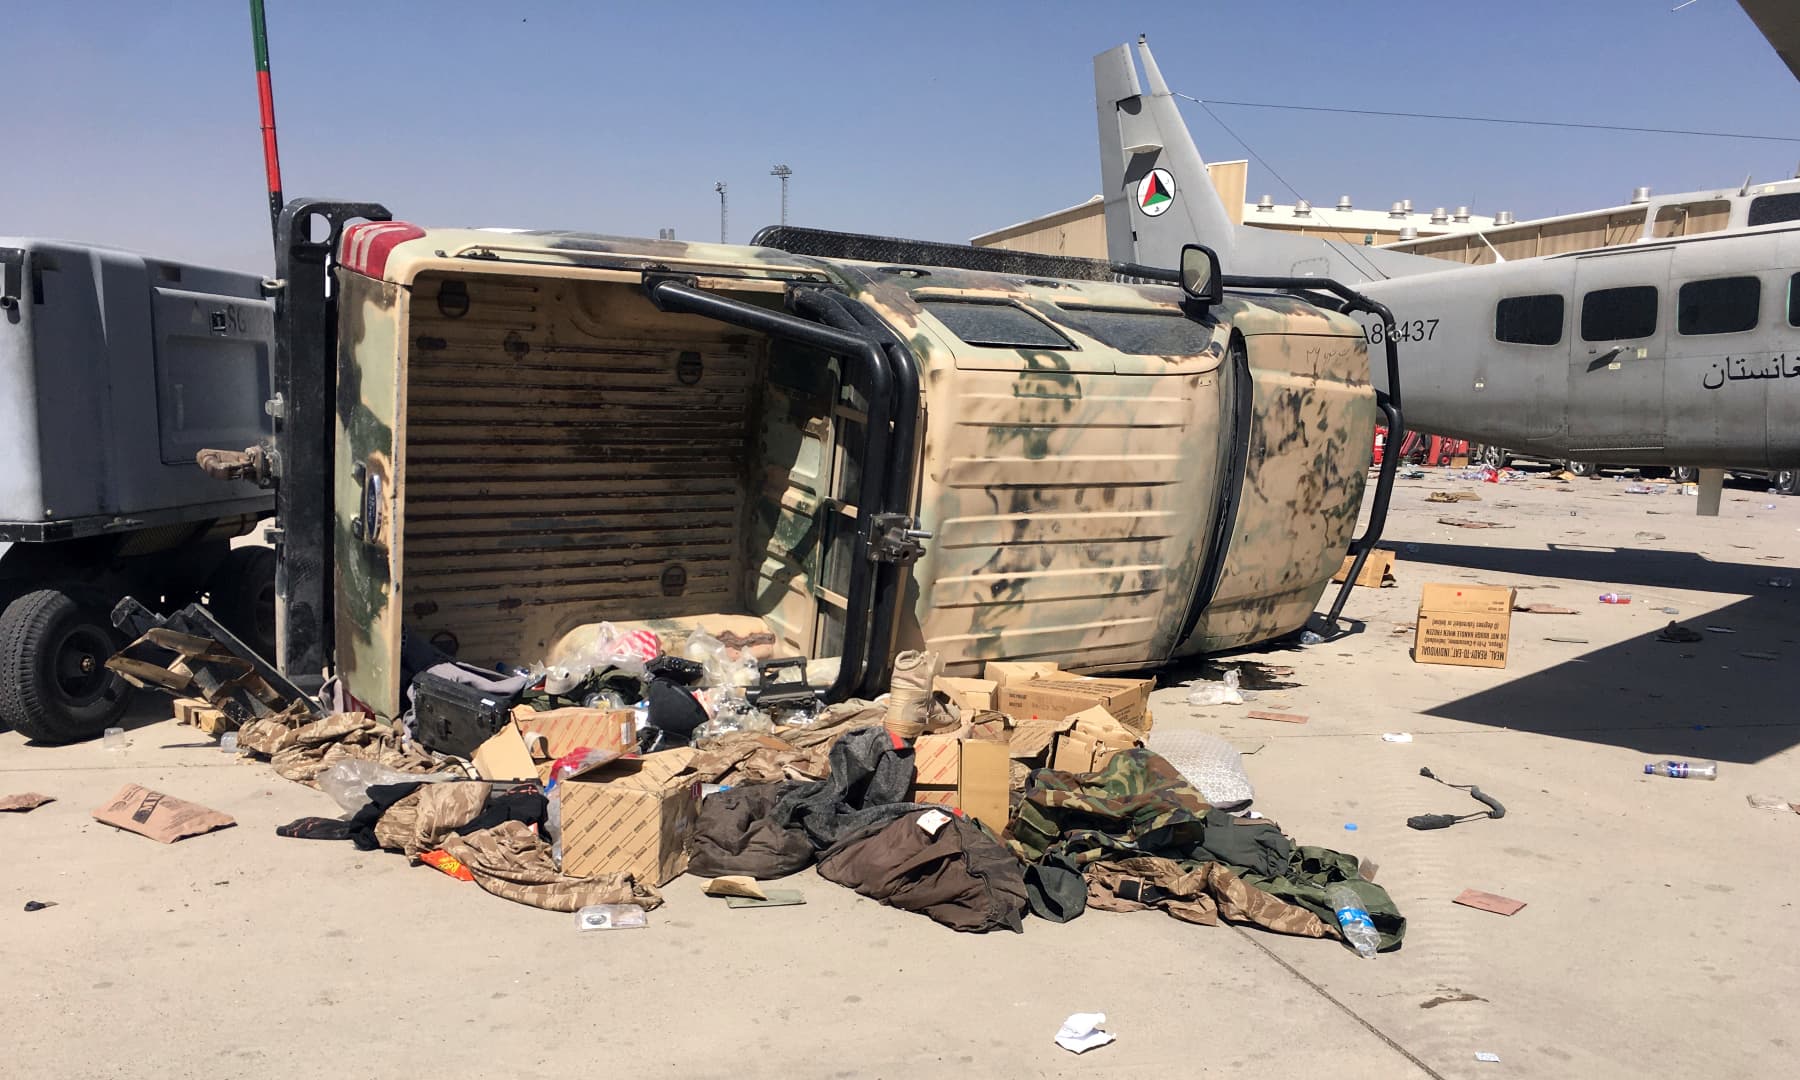 A damaged Afghan military airplane and vehicle are seen after the Taliban's takeover inside the Hamid Karzai International Airport in Kabul, Afghanistan on September 5, 2021. — AP